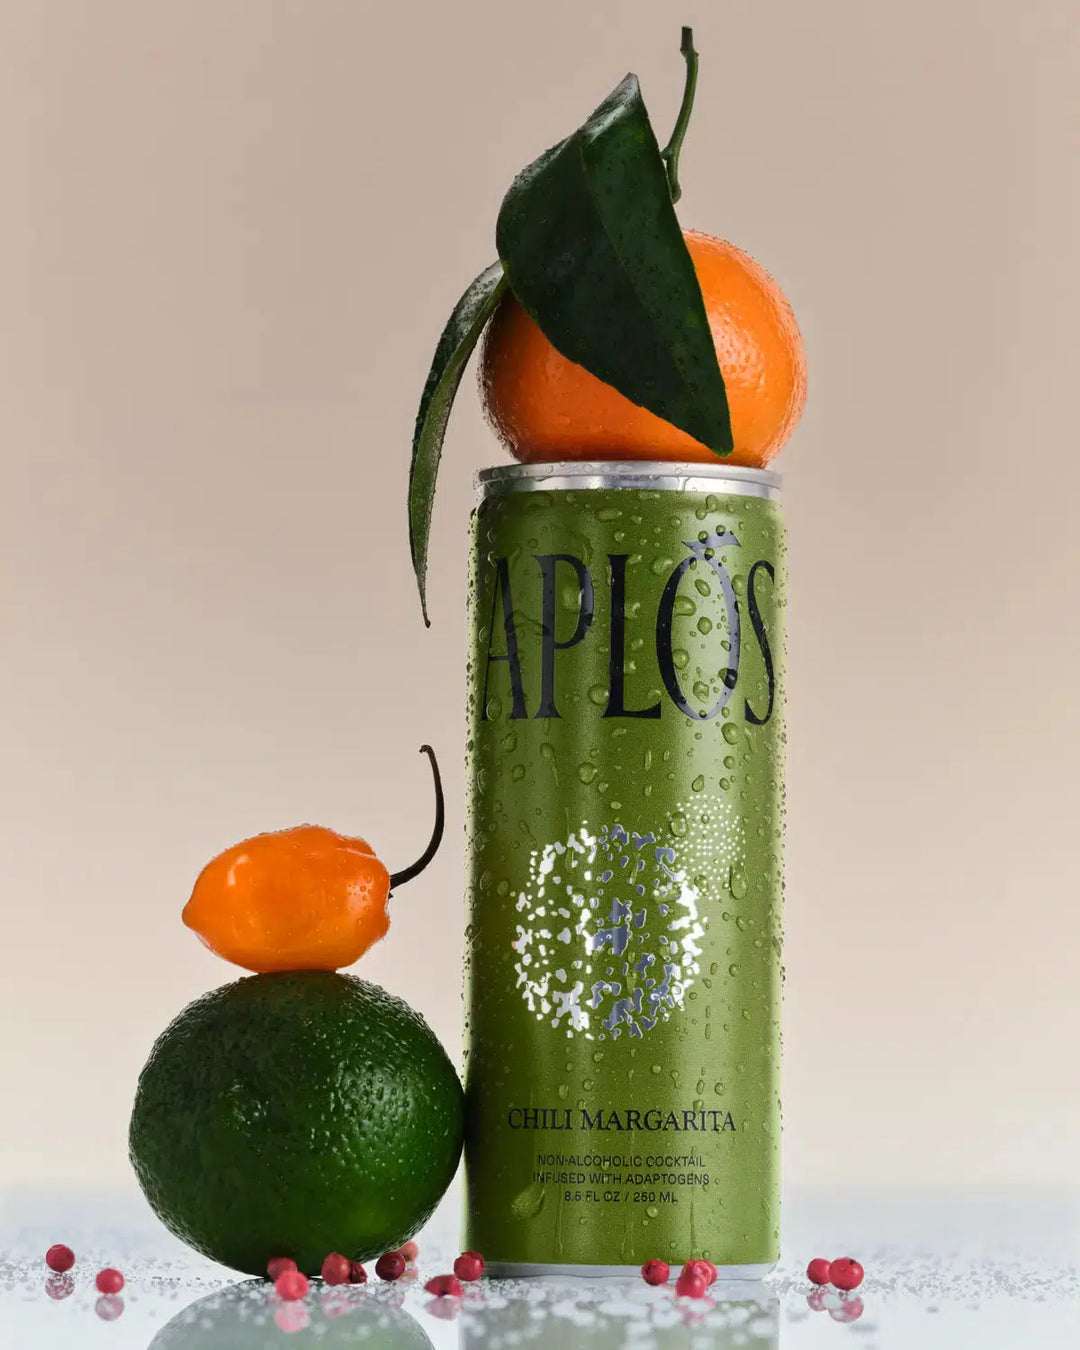 Aplós — Chili Margarita, Non-Alcoholic Cocktail Infused With Adaptogens (Lifestyle) | A Fresh Sip, The Best Non-Alcoholic Adult Beverages